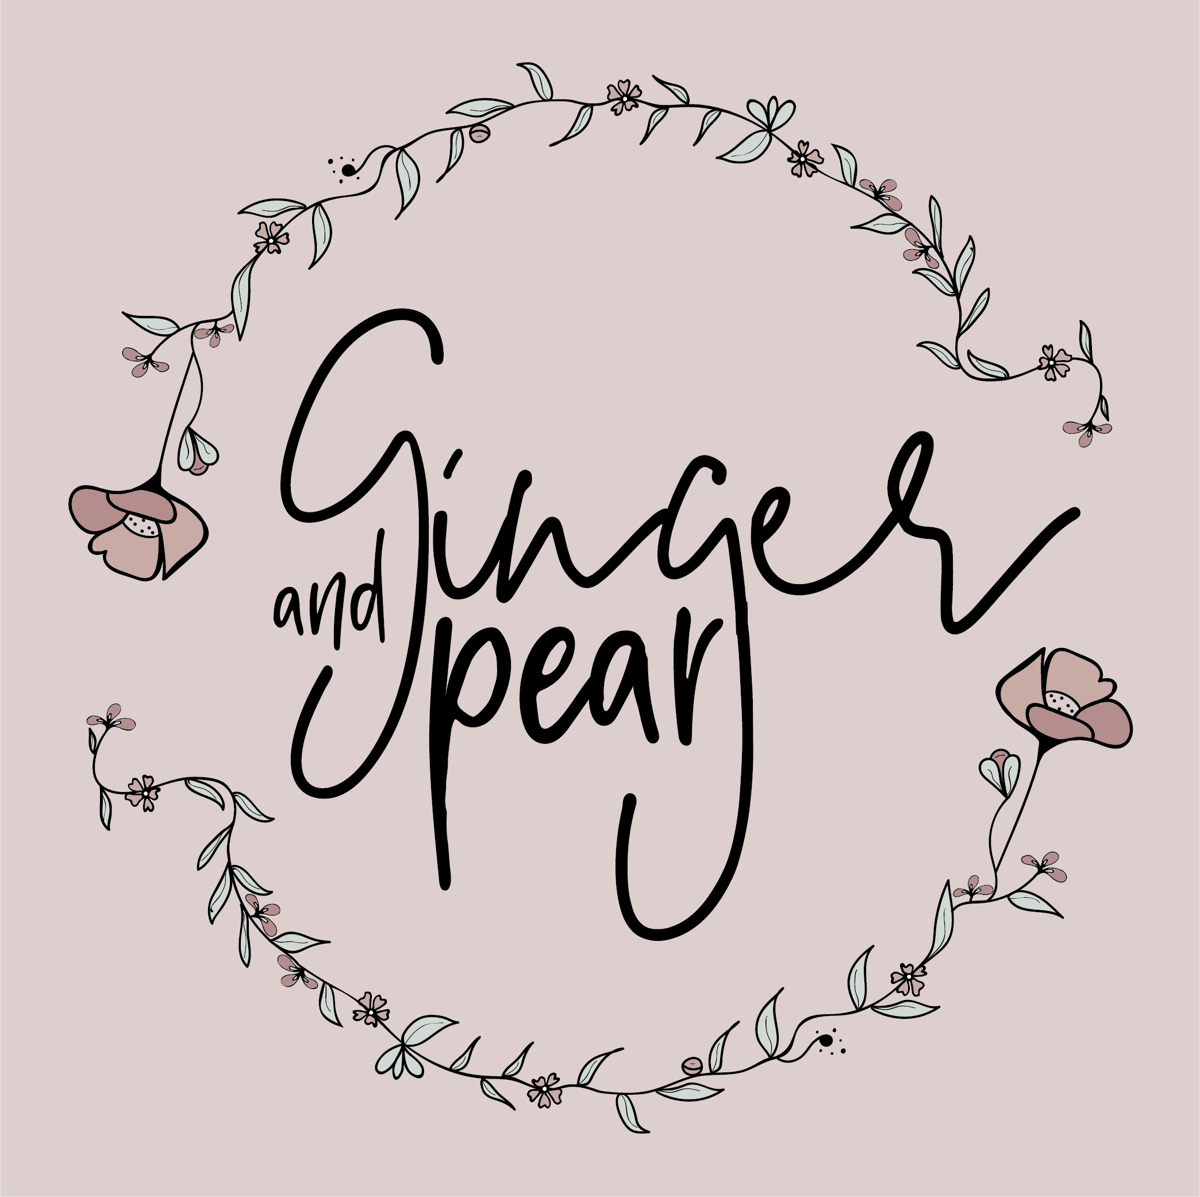 / Ginger and Pear